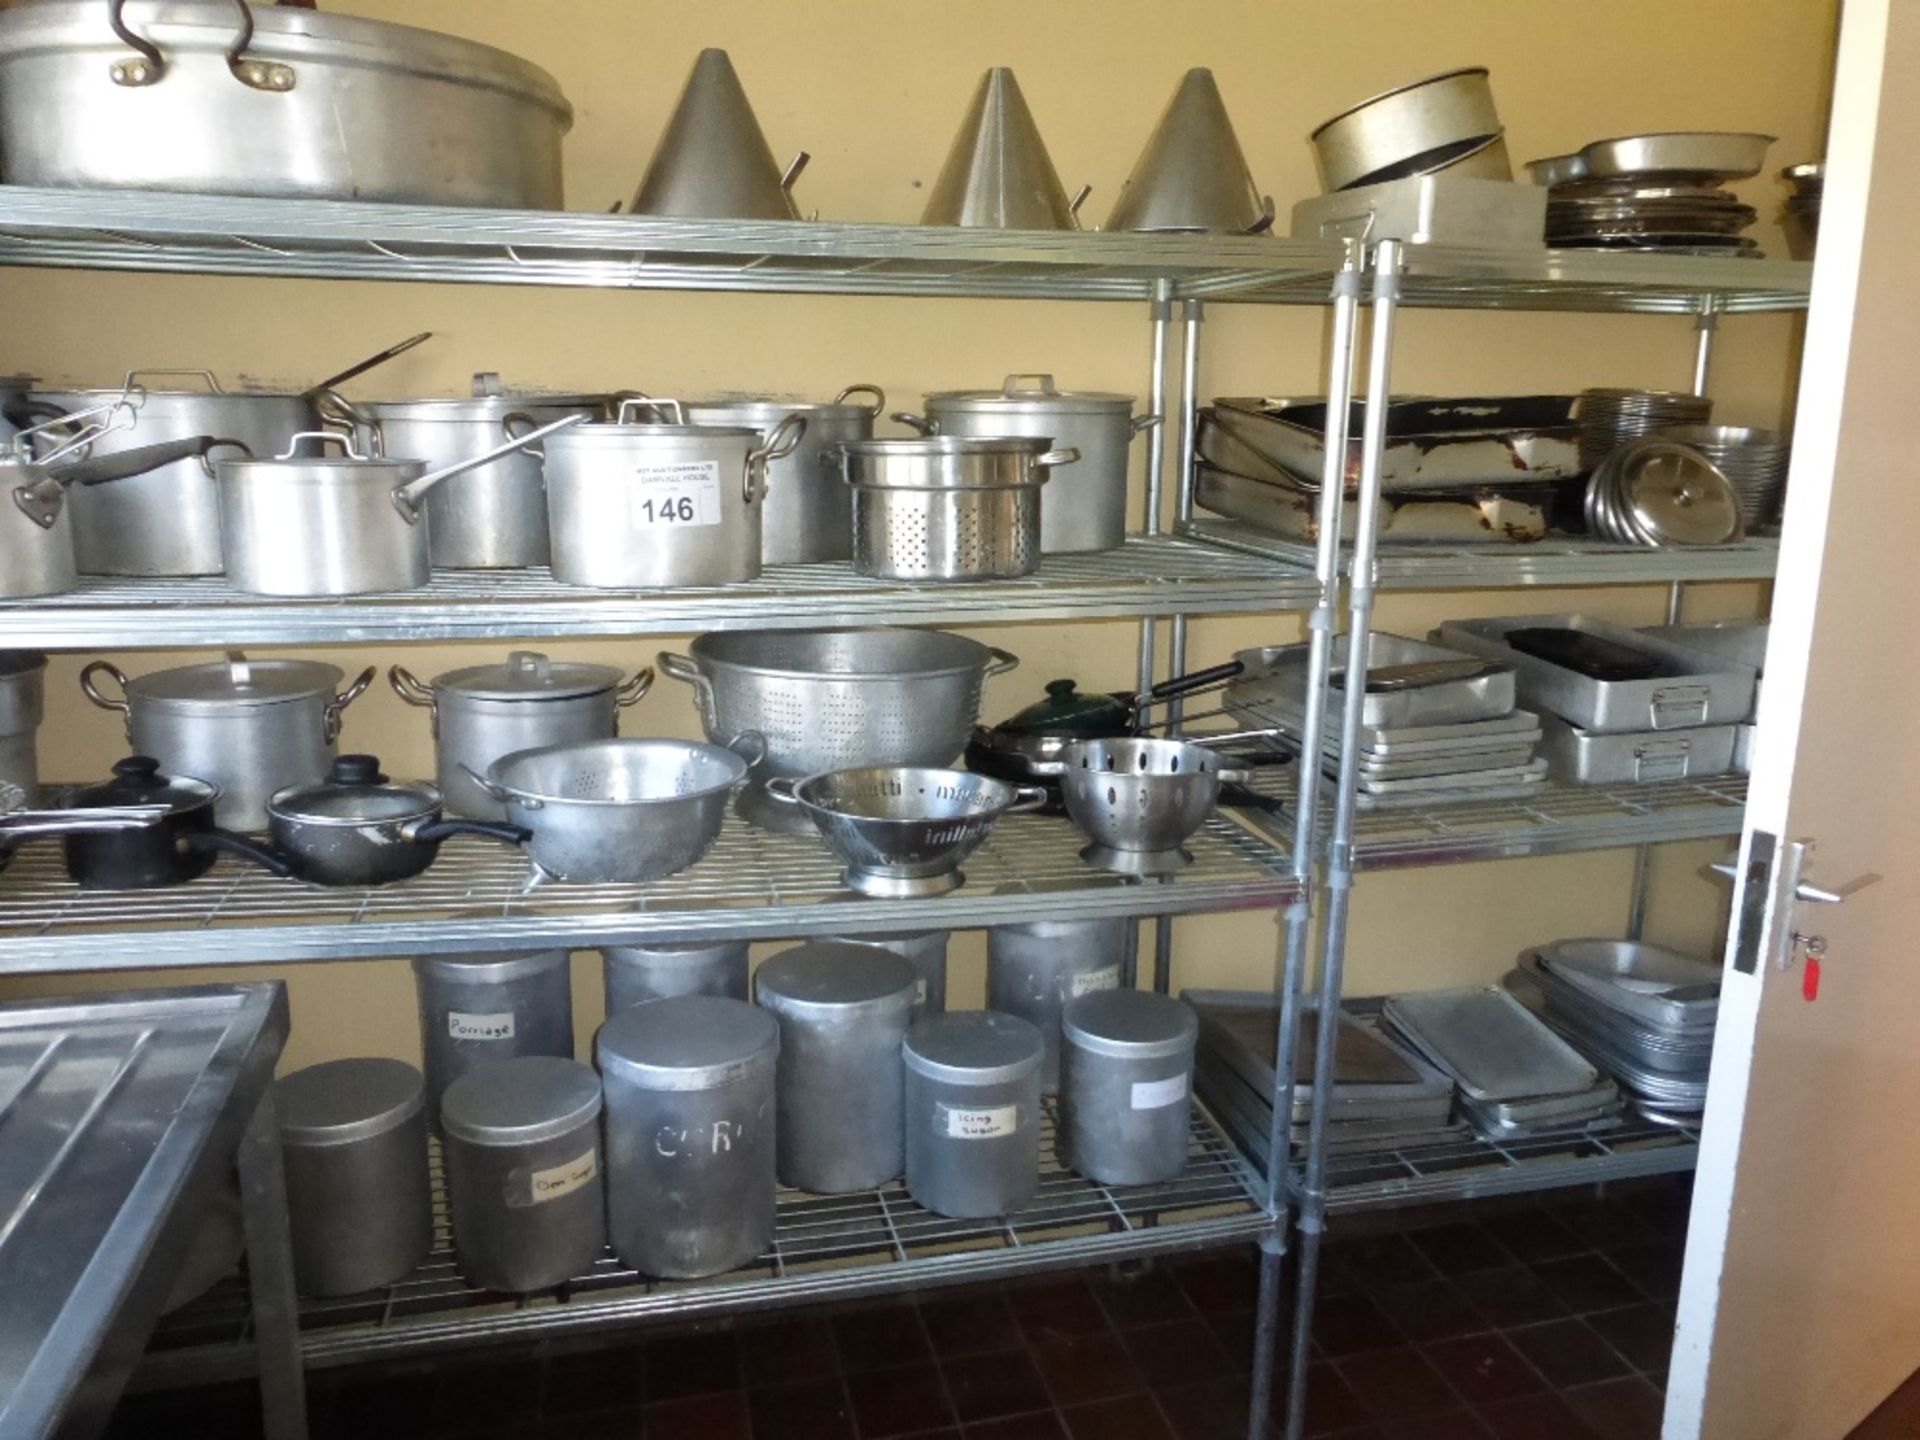 3 metal four tier racks and a large quantity of miscellaneous aluminium pans, colanders, bins and